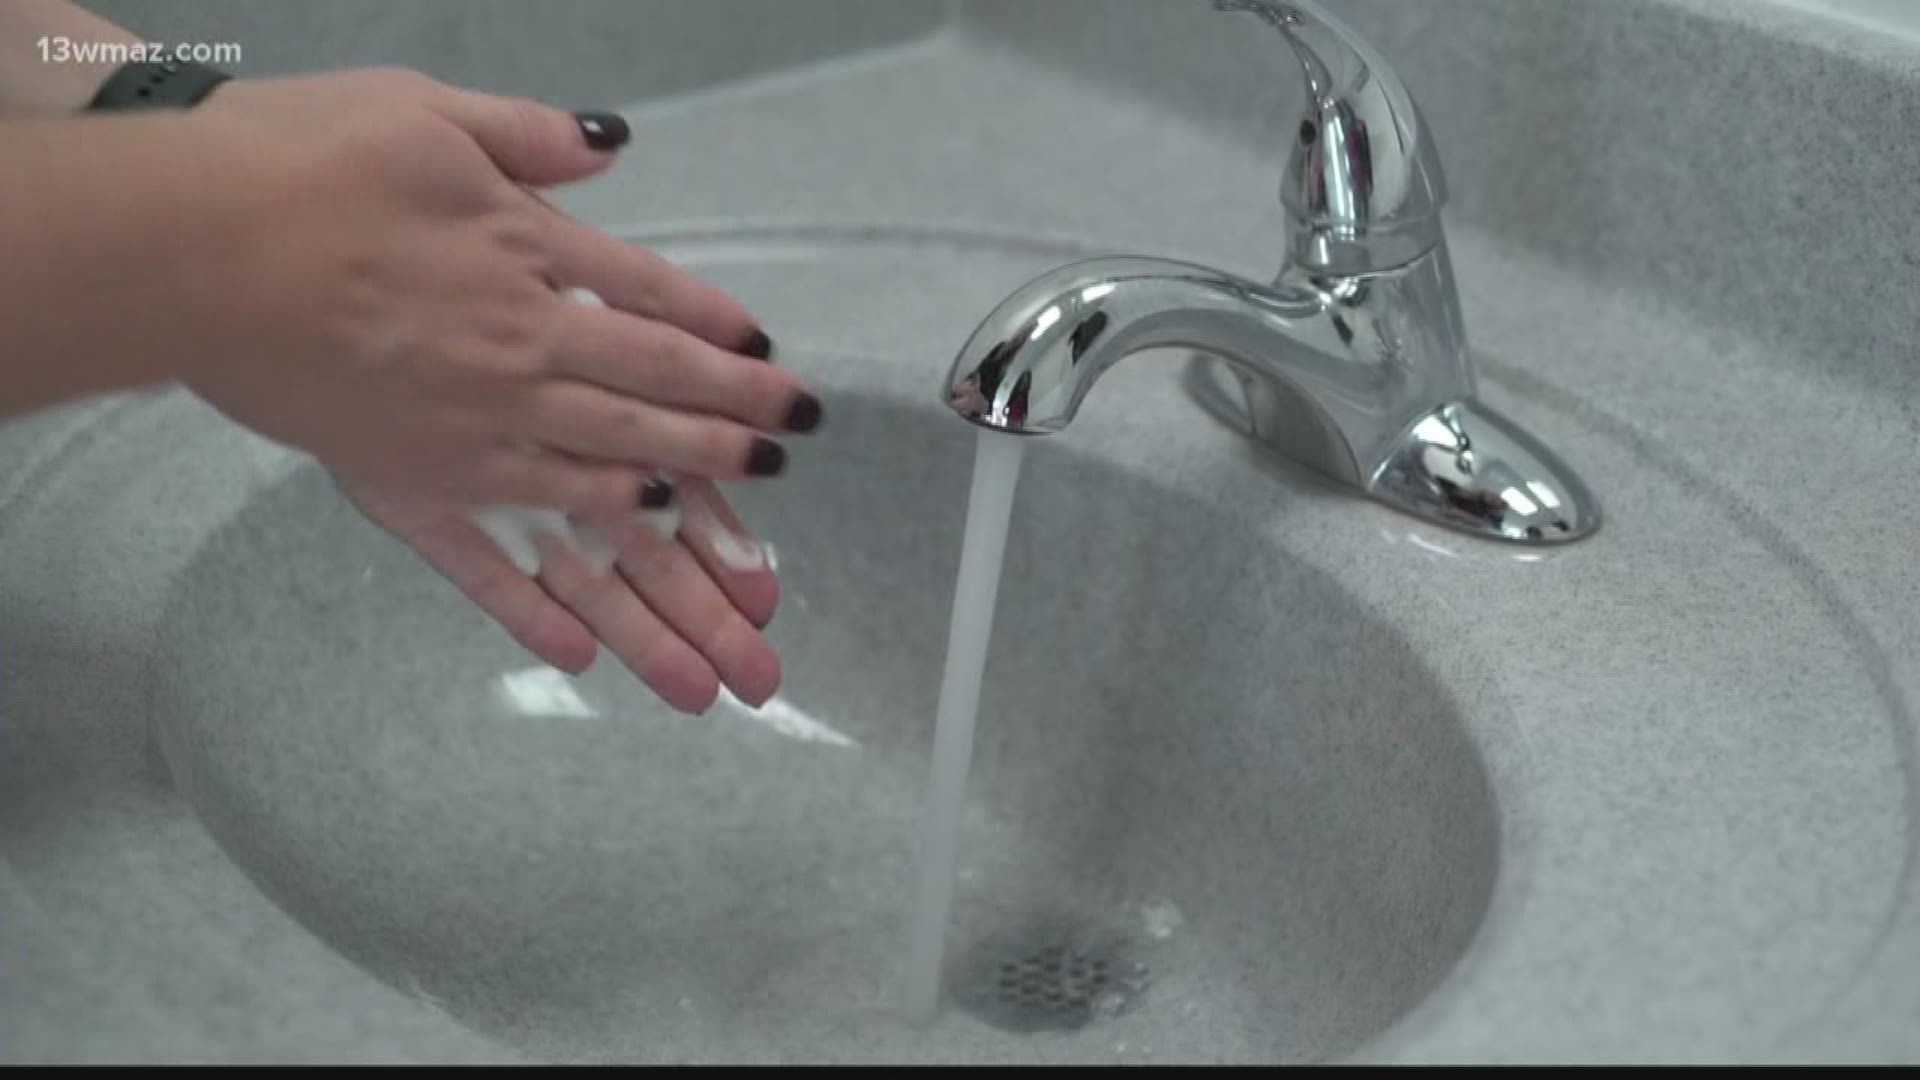 Sanitizer or soap? When it comes to keeping your hands germ-free what is the better option?